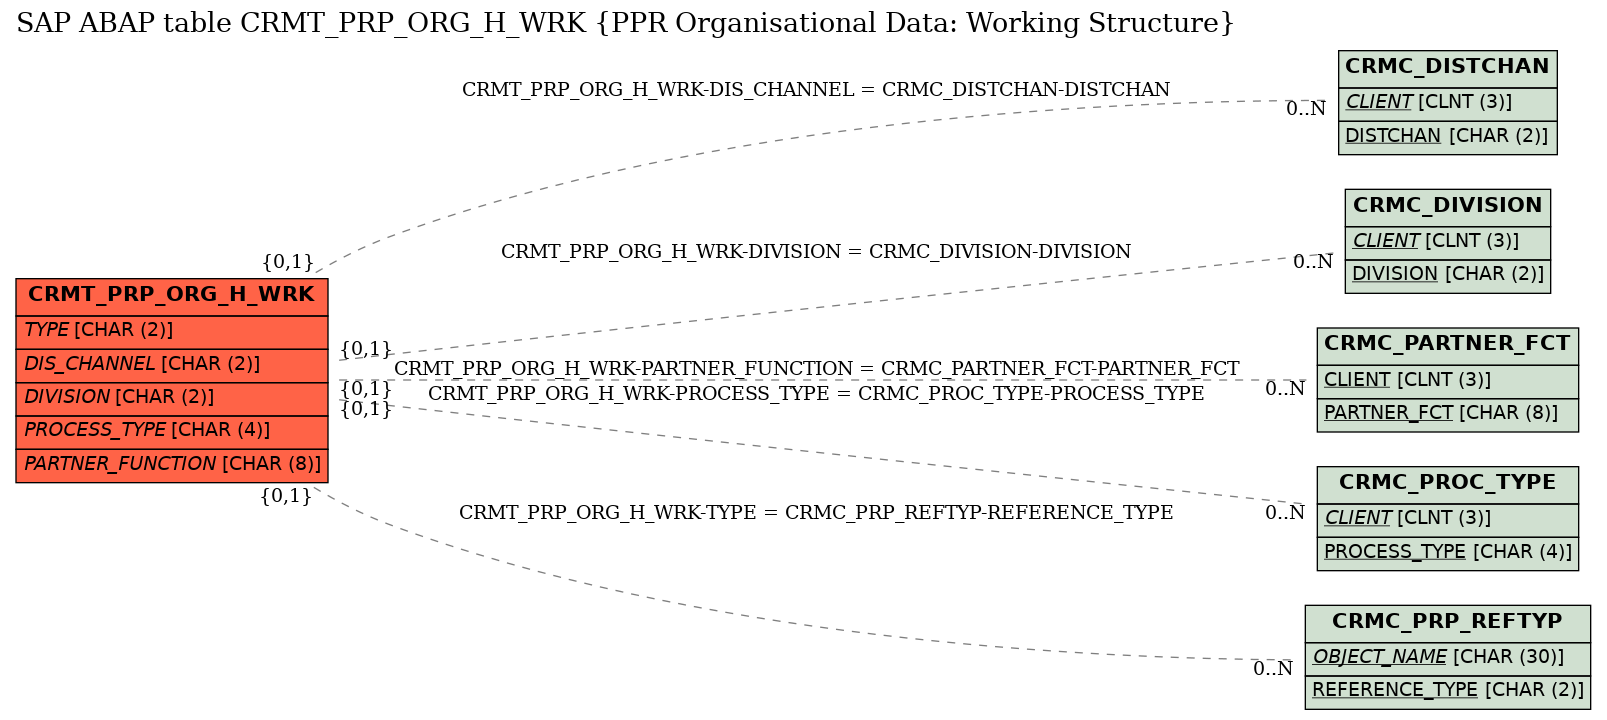 E-R Diagram for table CRMT_PRP_ORG_H_WRK (PPR Organisational Data: Working Structure)